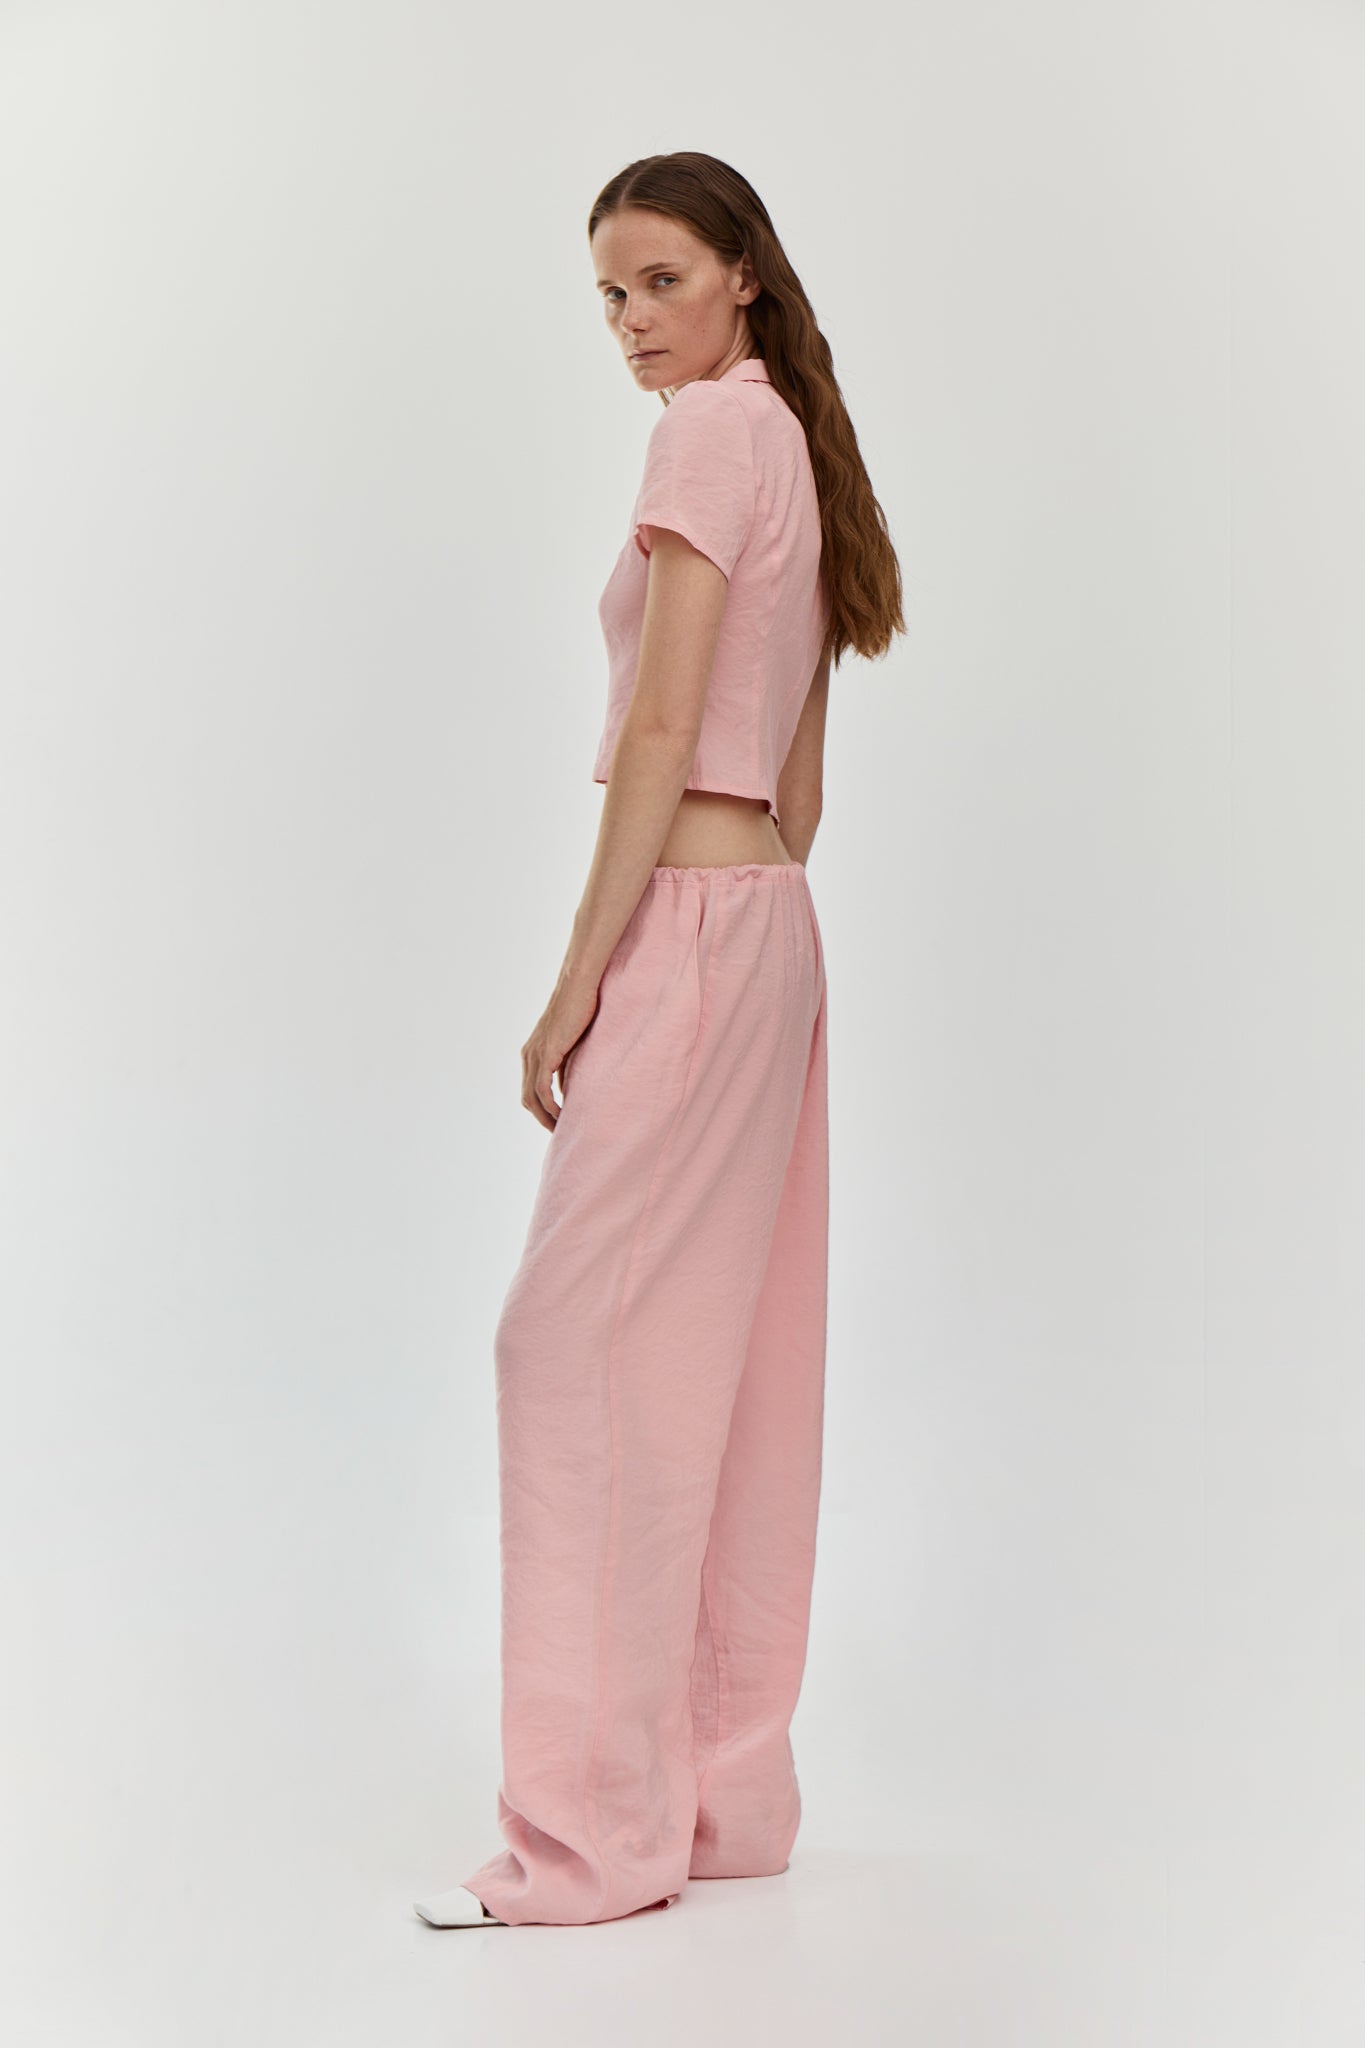 Pink viscose suit with low waist trousers and Lapel collar cropped blazer jacket with short sleeves from FORMA brand